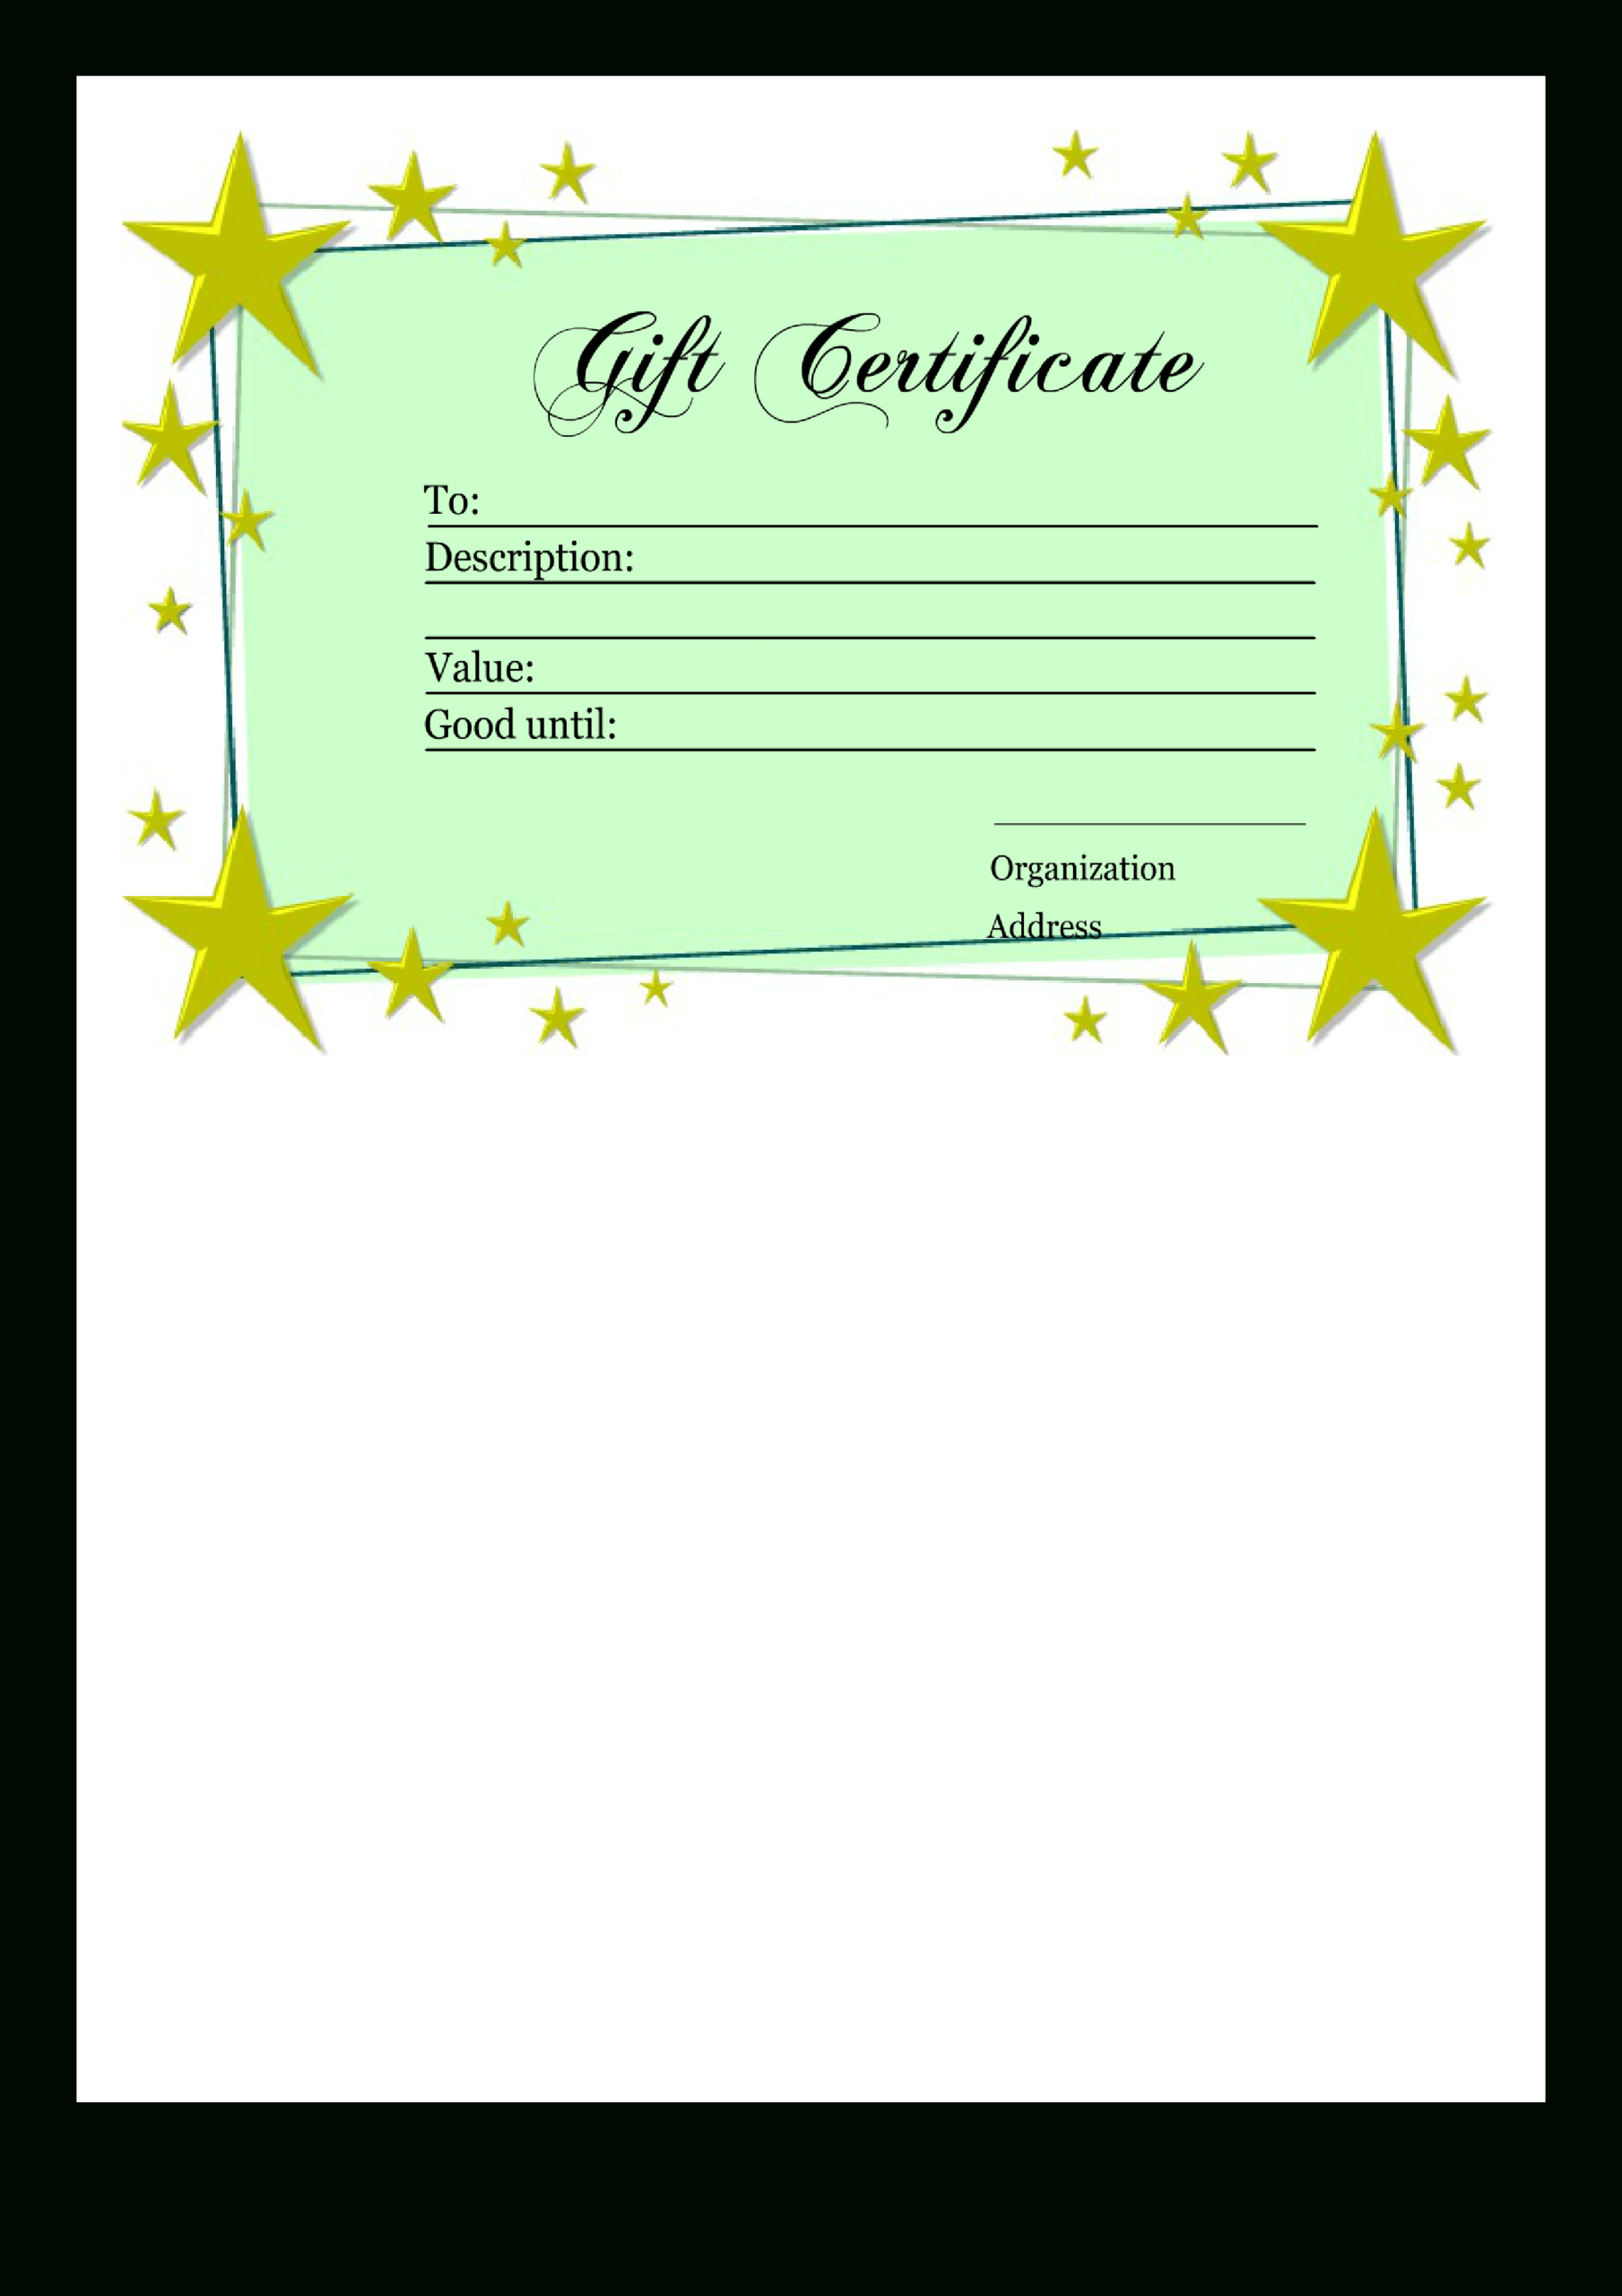 Homemade Gift Certificate Template | Templates At Pertaining To Homemade Gift Certificate Template